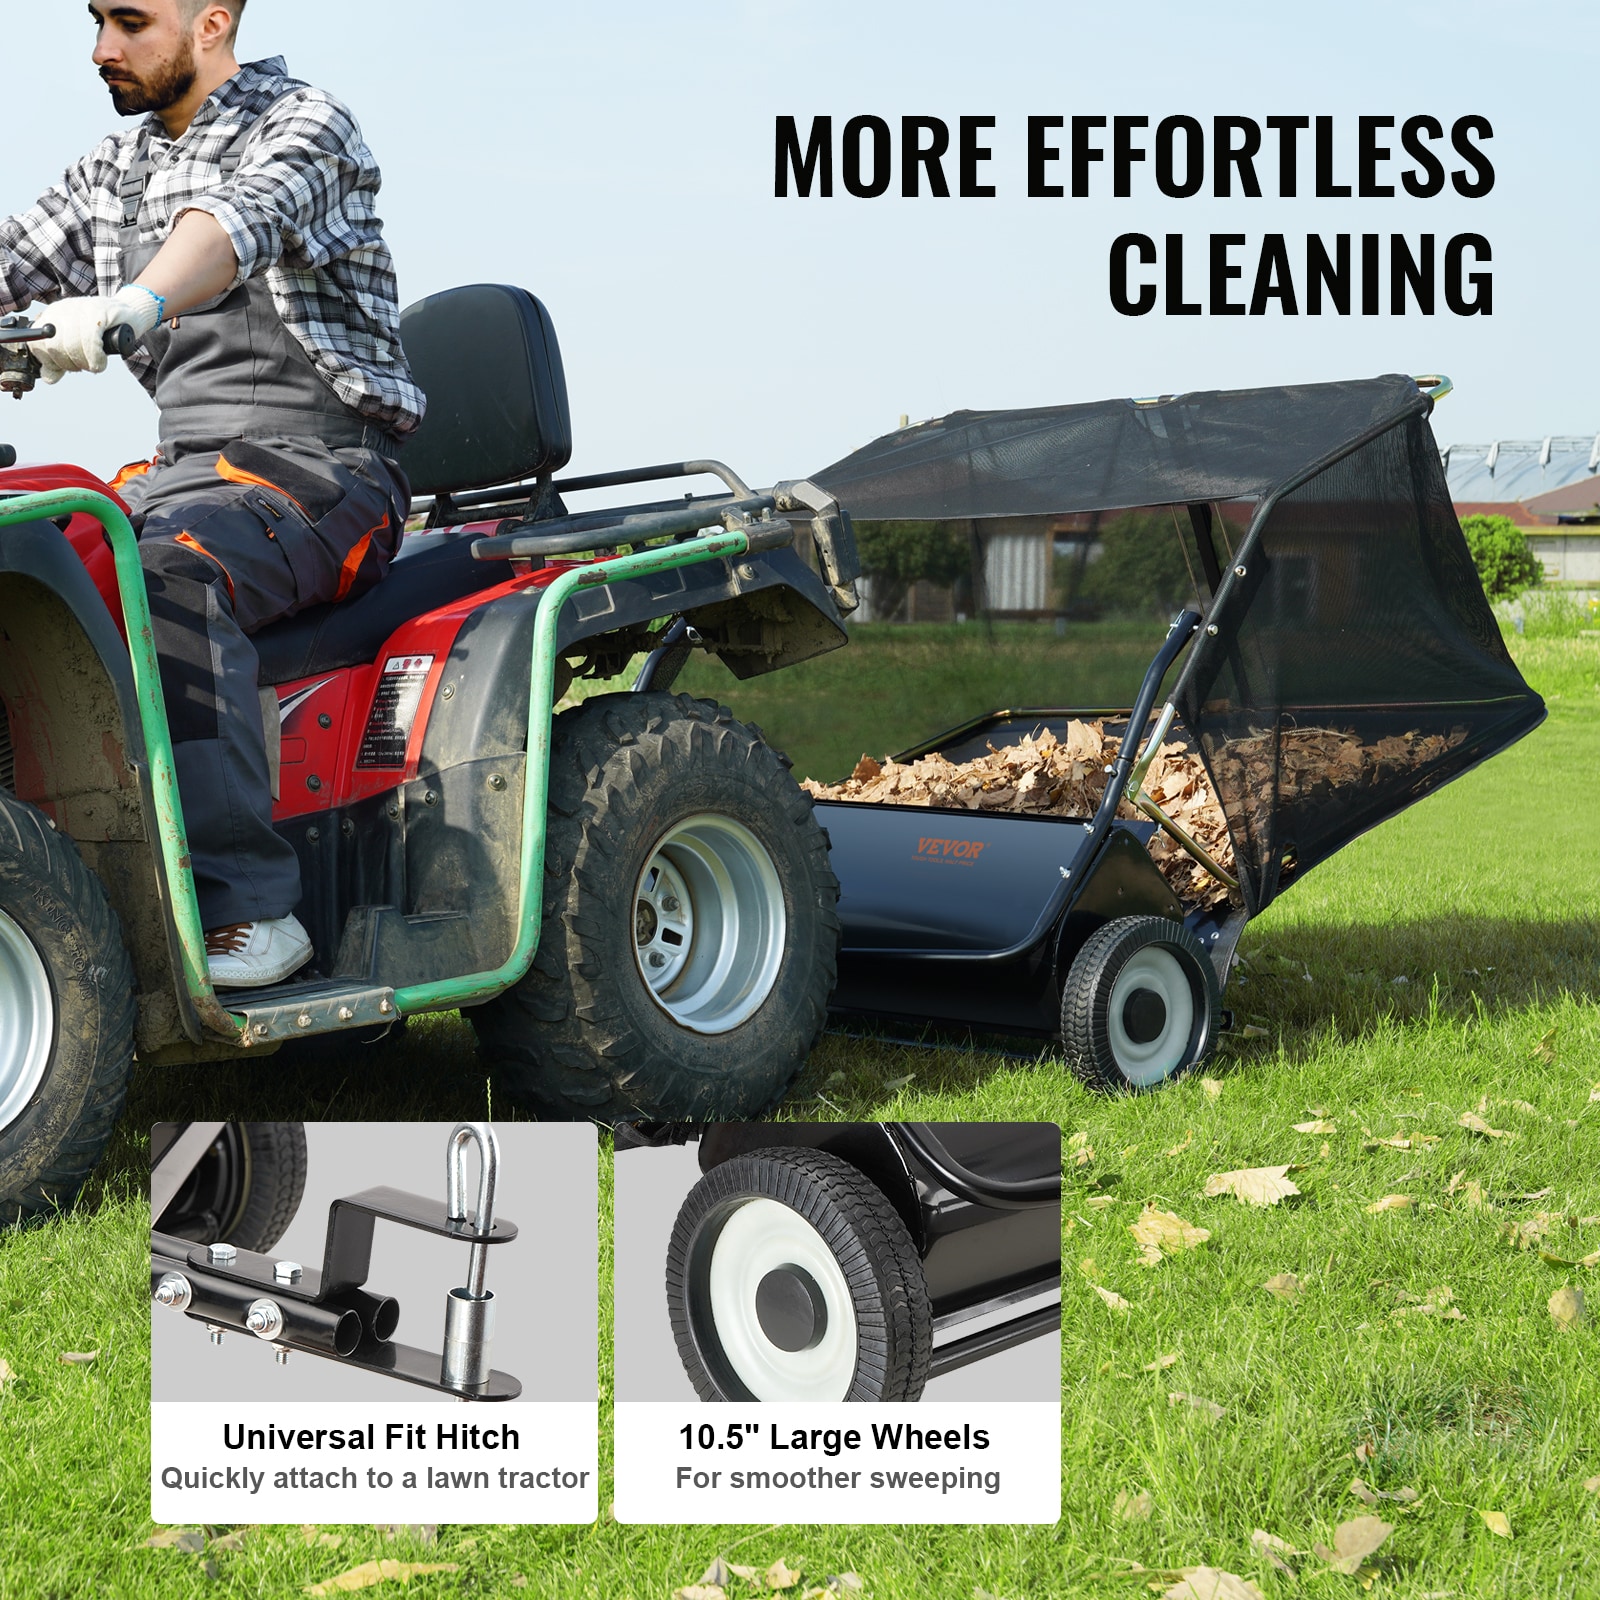 Lawn Sweeper Outdoor Tools & Equipment at